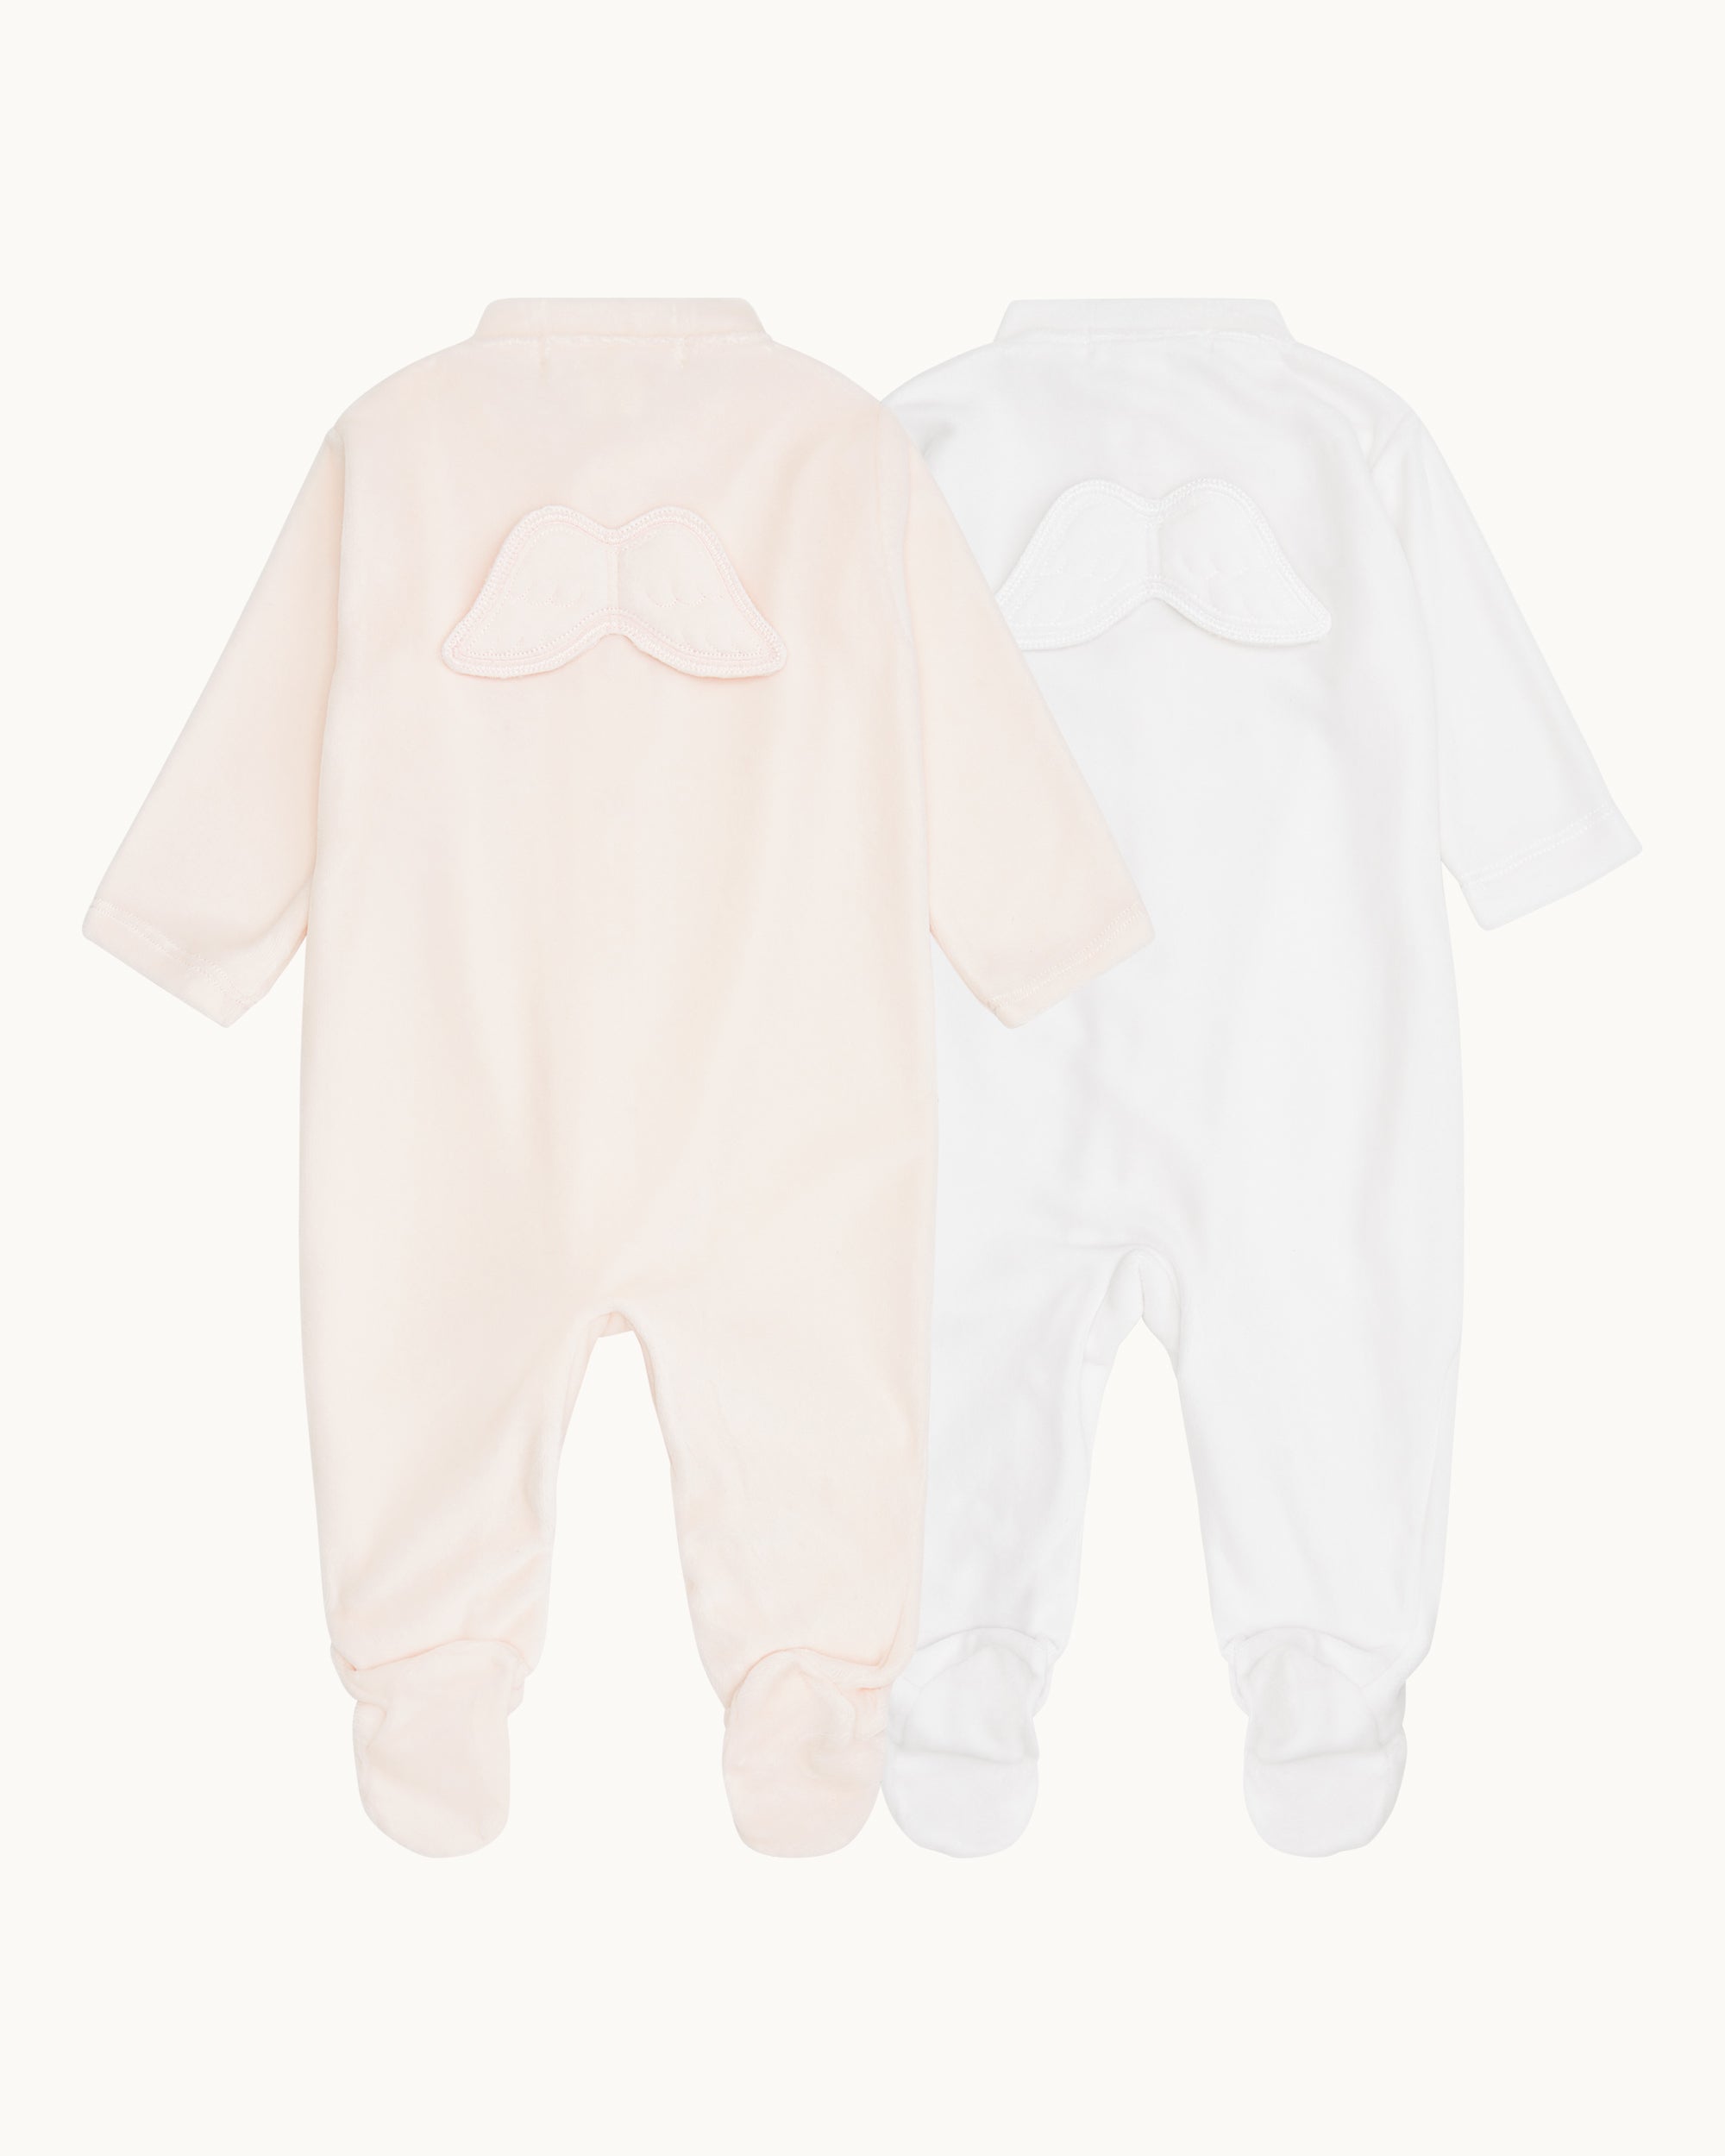 Set of 2 - Pointelle Angel Wing™ Sleepsuits - White & Pink